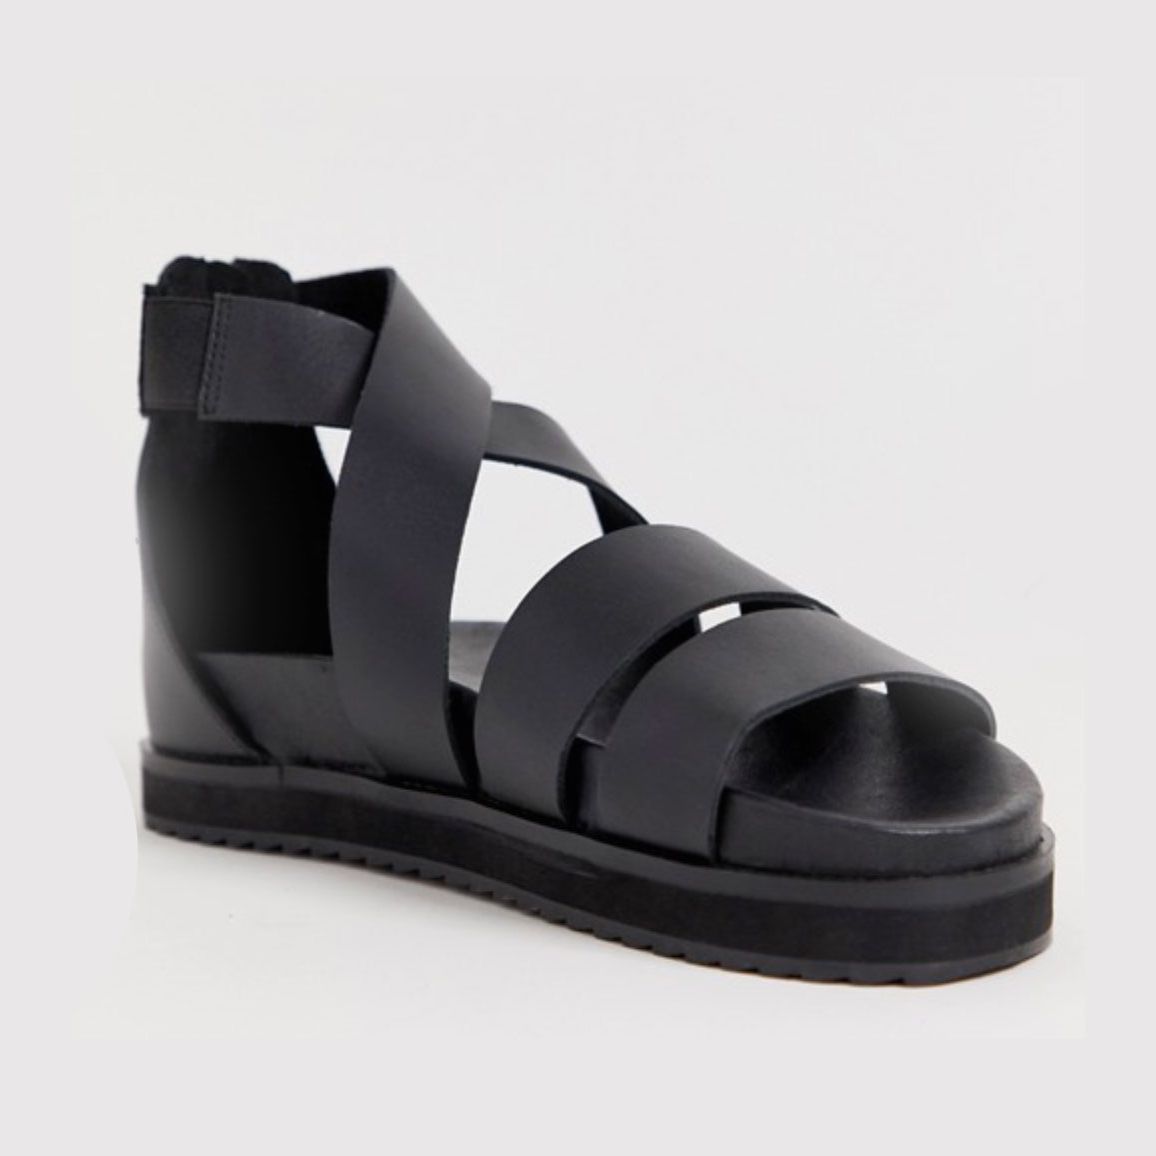 mens sandals style 2019